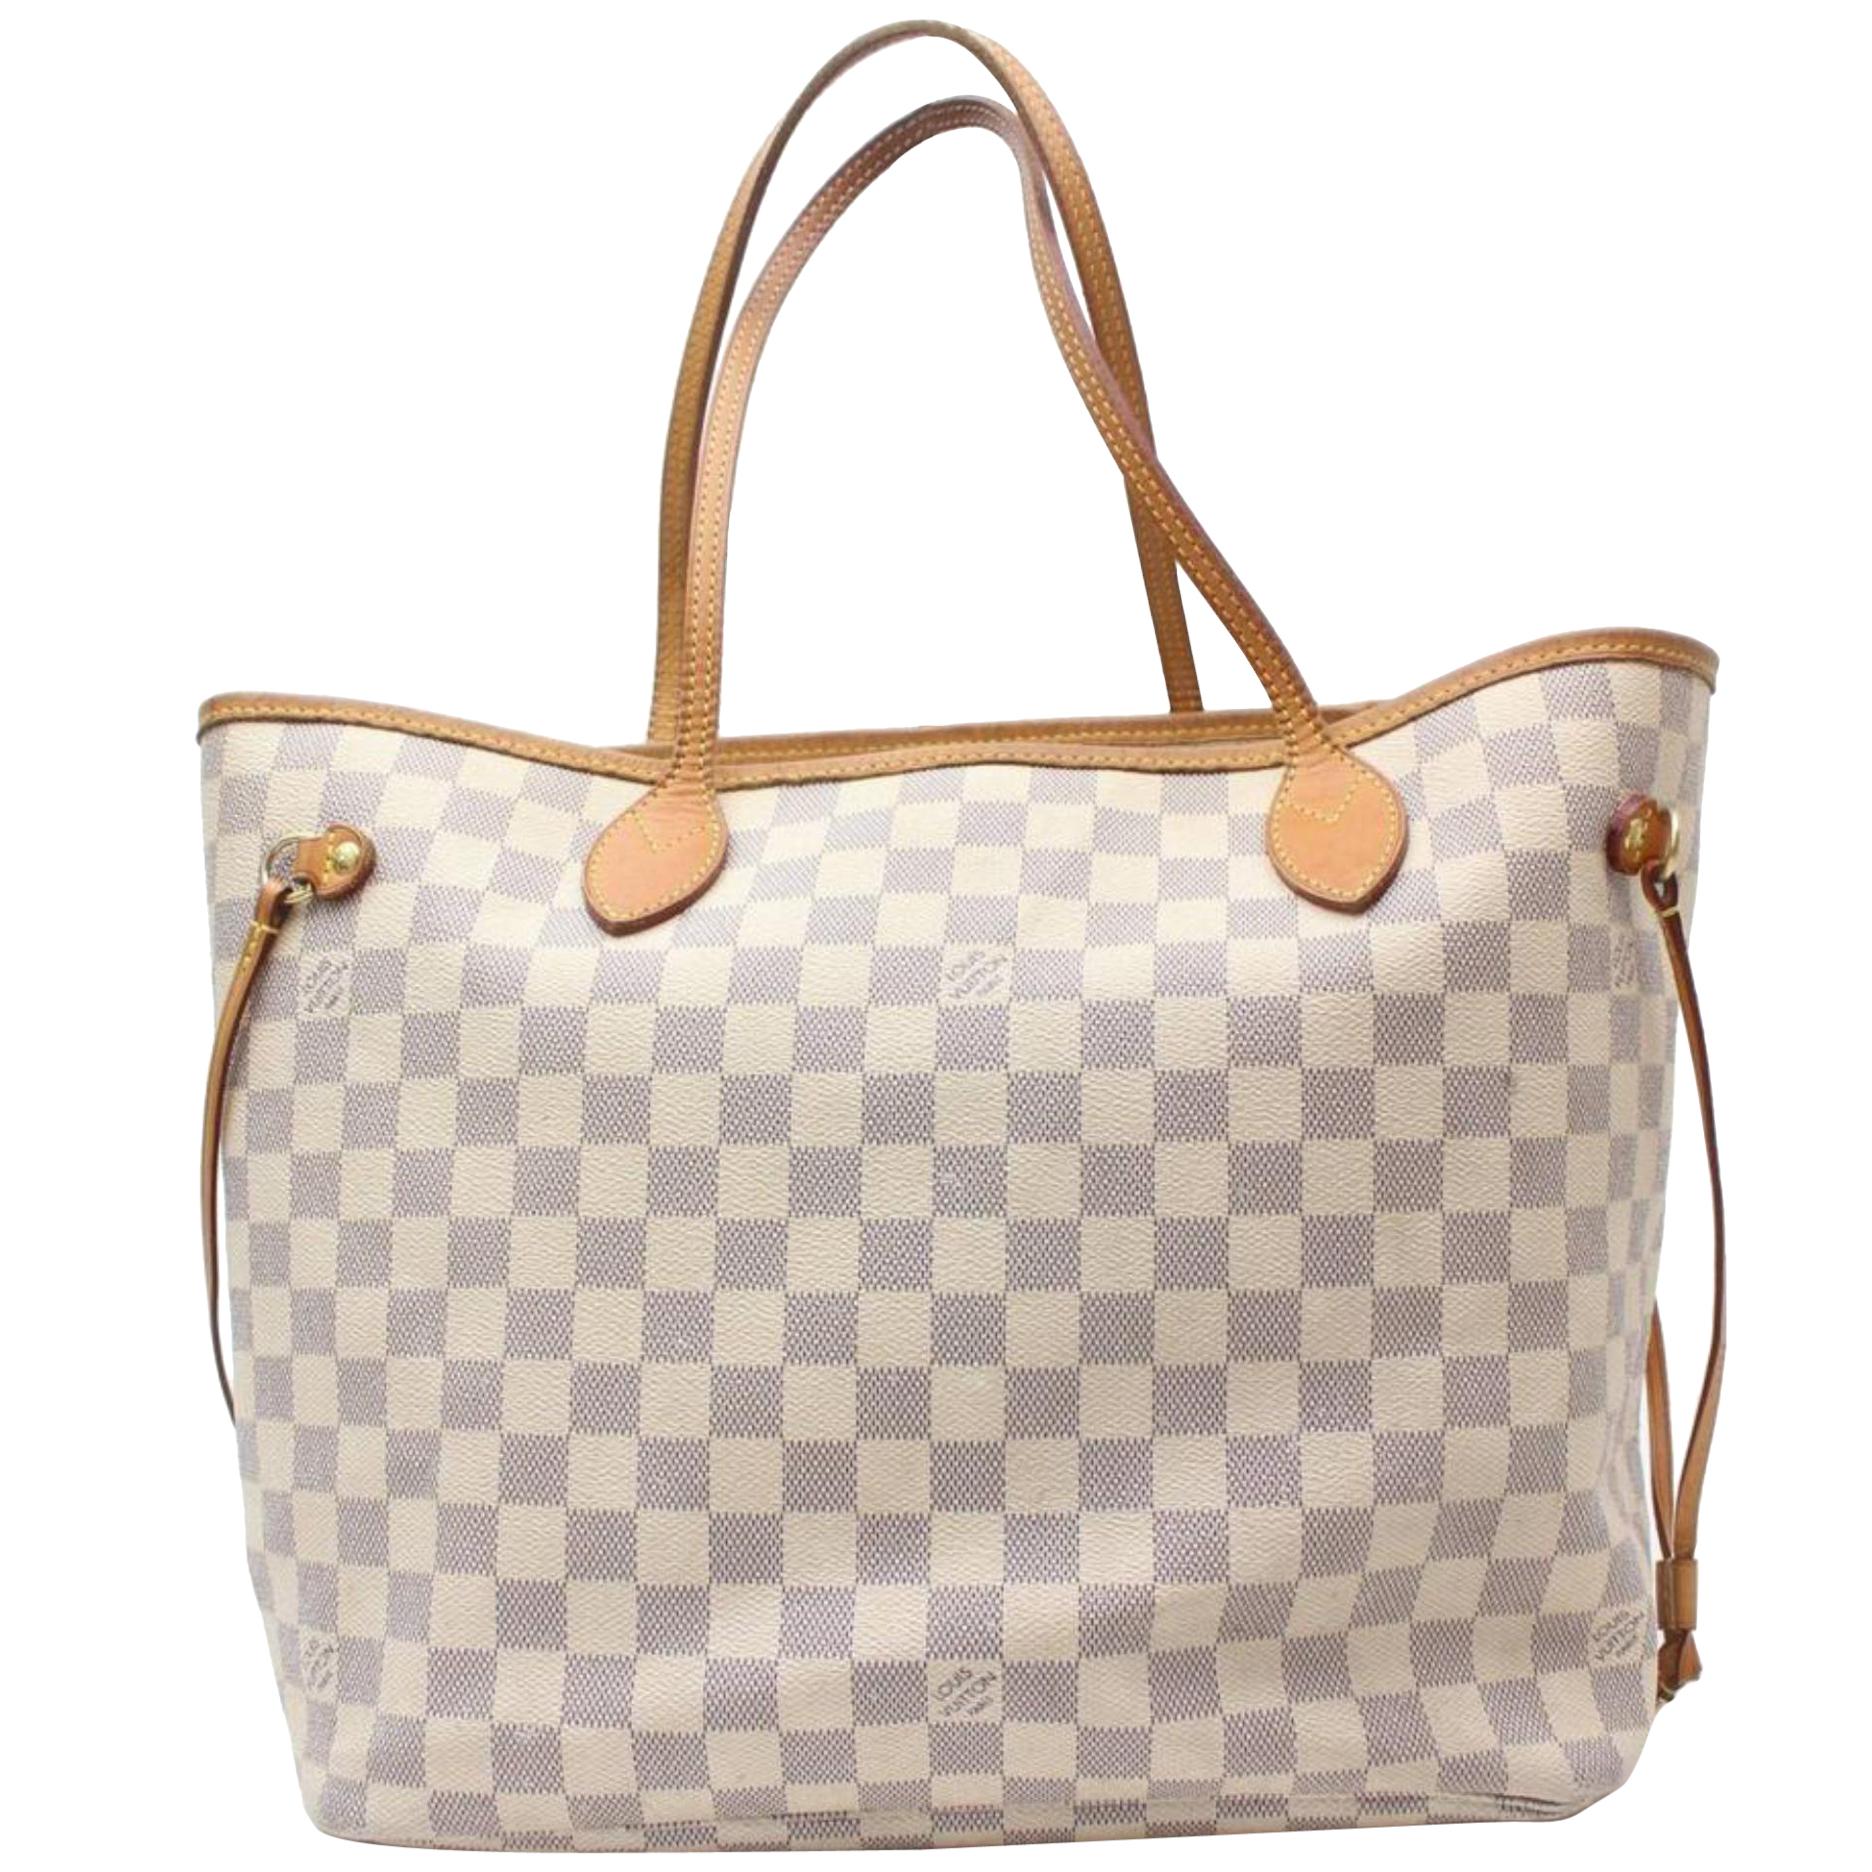 Louis Vuitton Neverfull Damier Azur Mm 868790 White Coated Canvas Tote For Sale